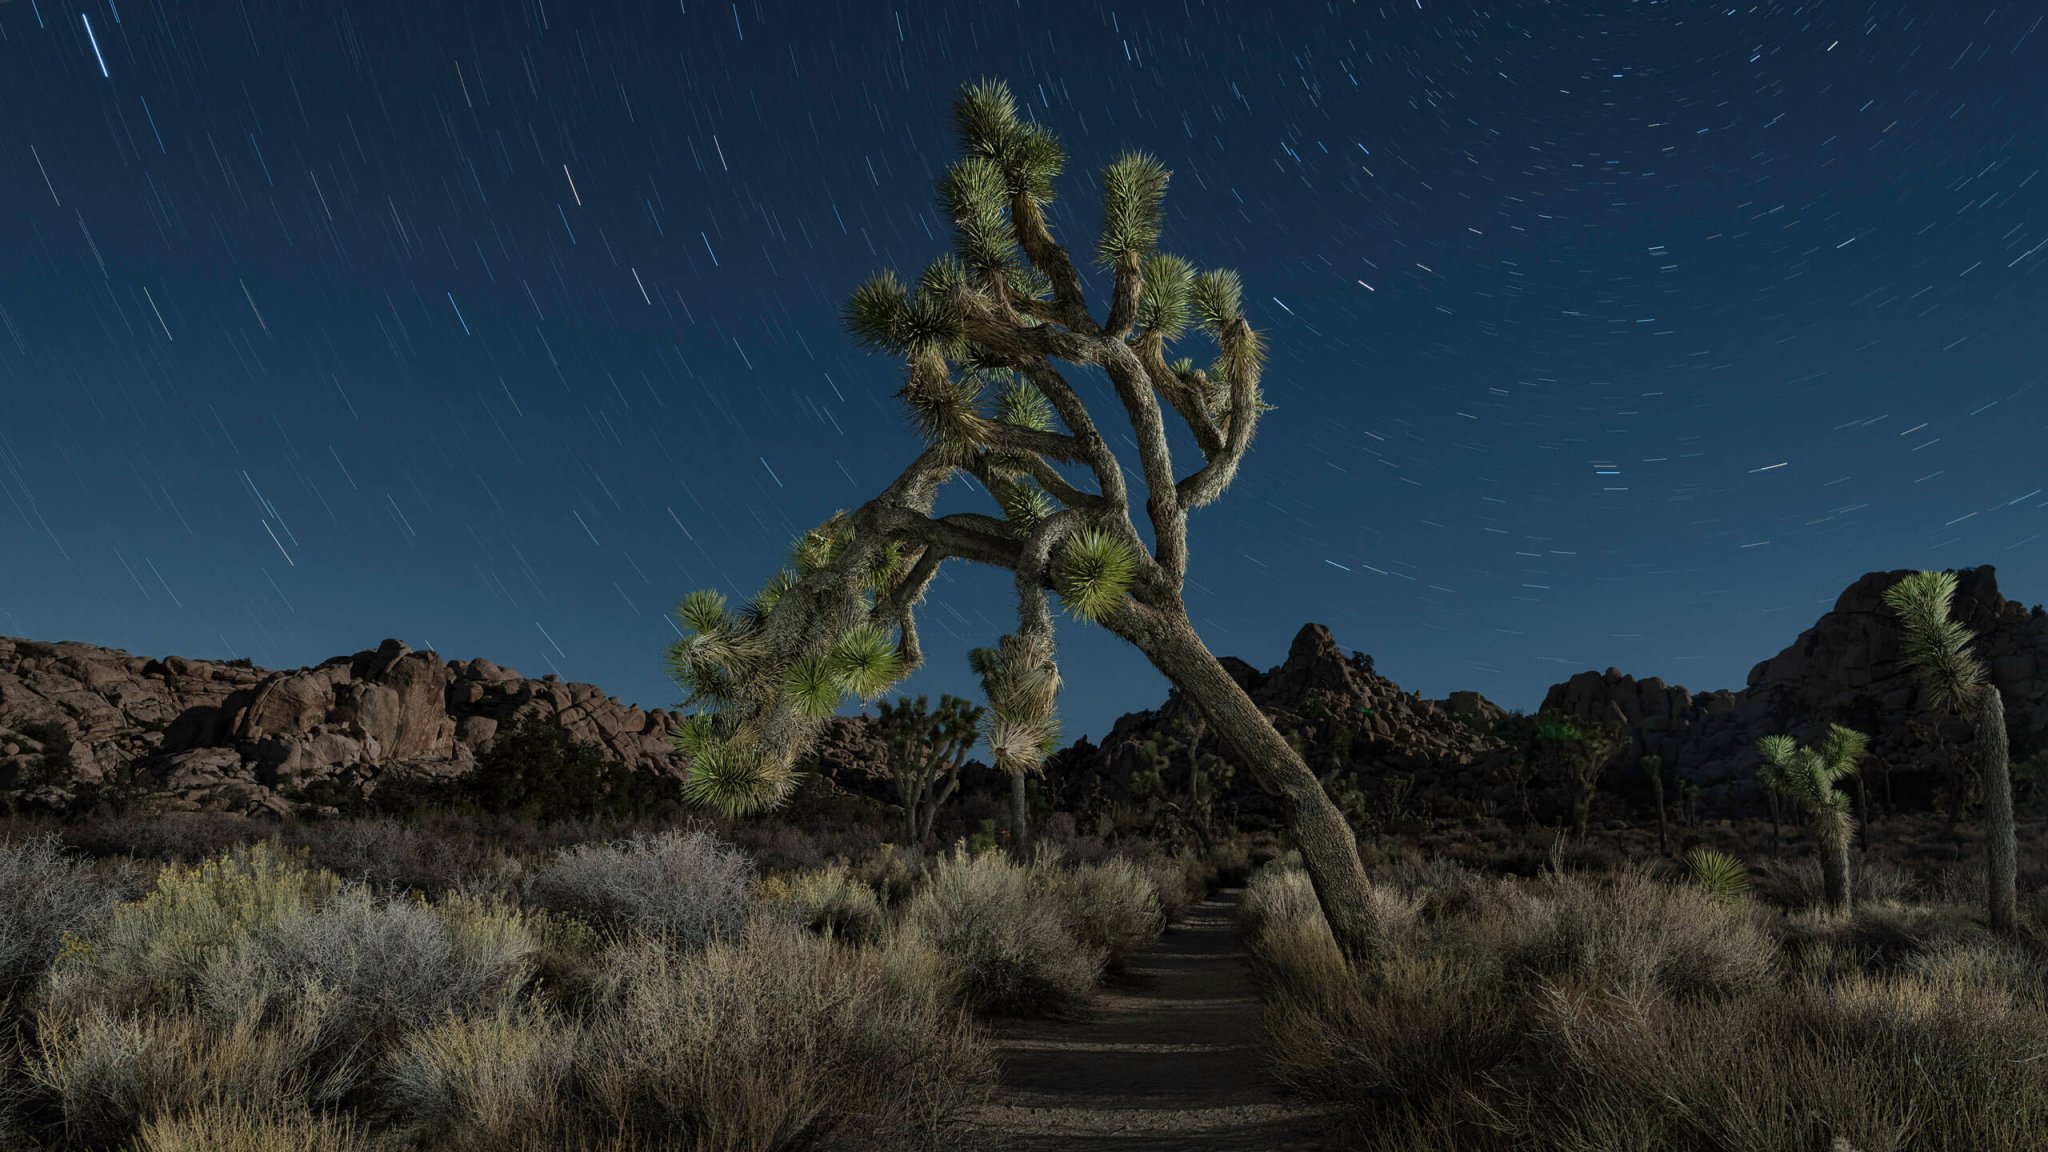 Challenging Lightroom's Select Sky mask on a night sky with a Joshua Tree